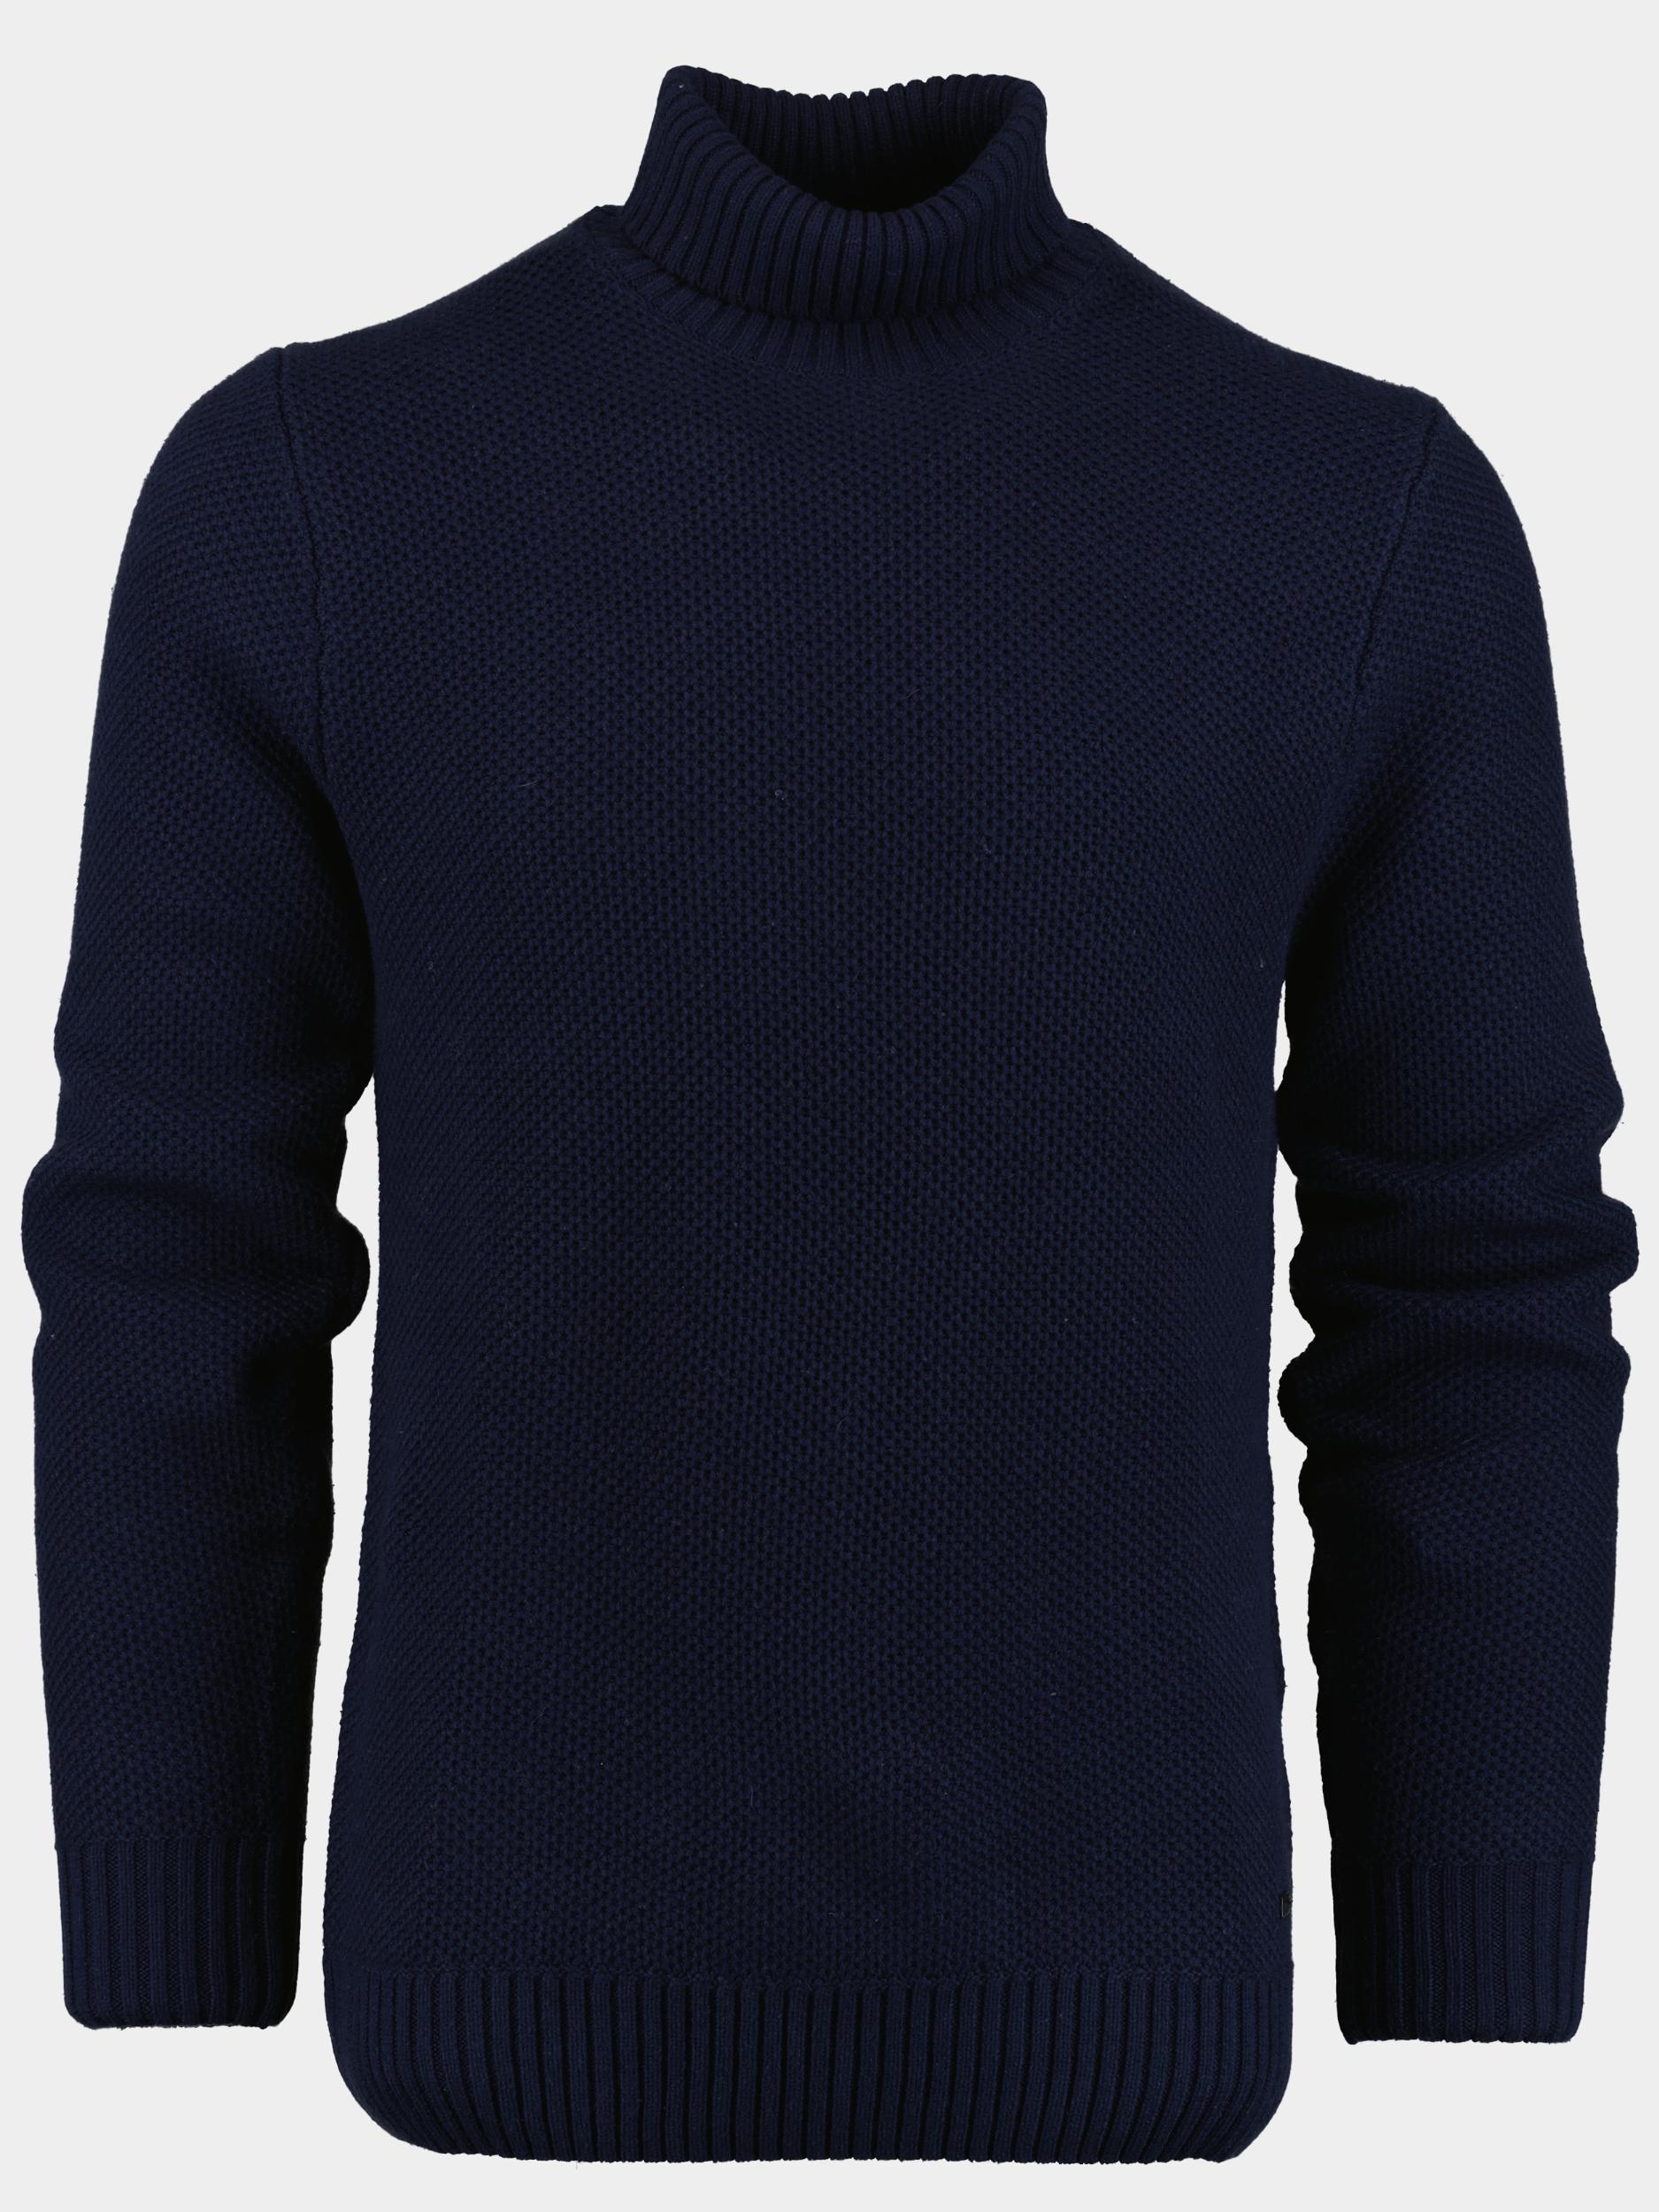 Born With Appetite Coltrui Blauw Finnley Roll Neck Structure 23305FI16/290 navy